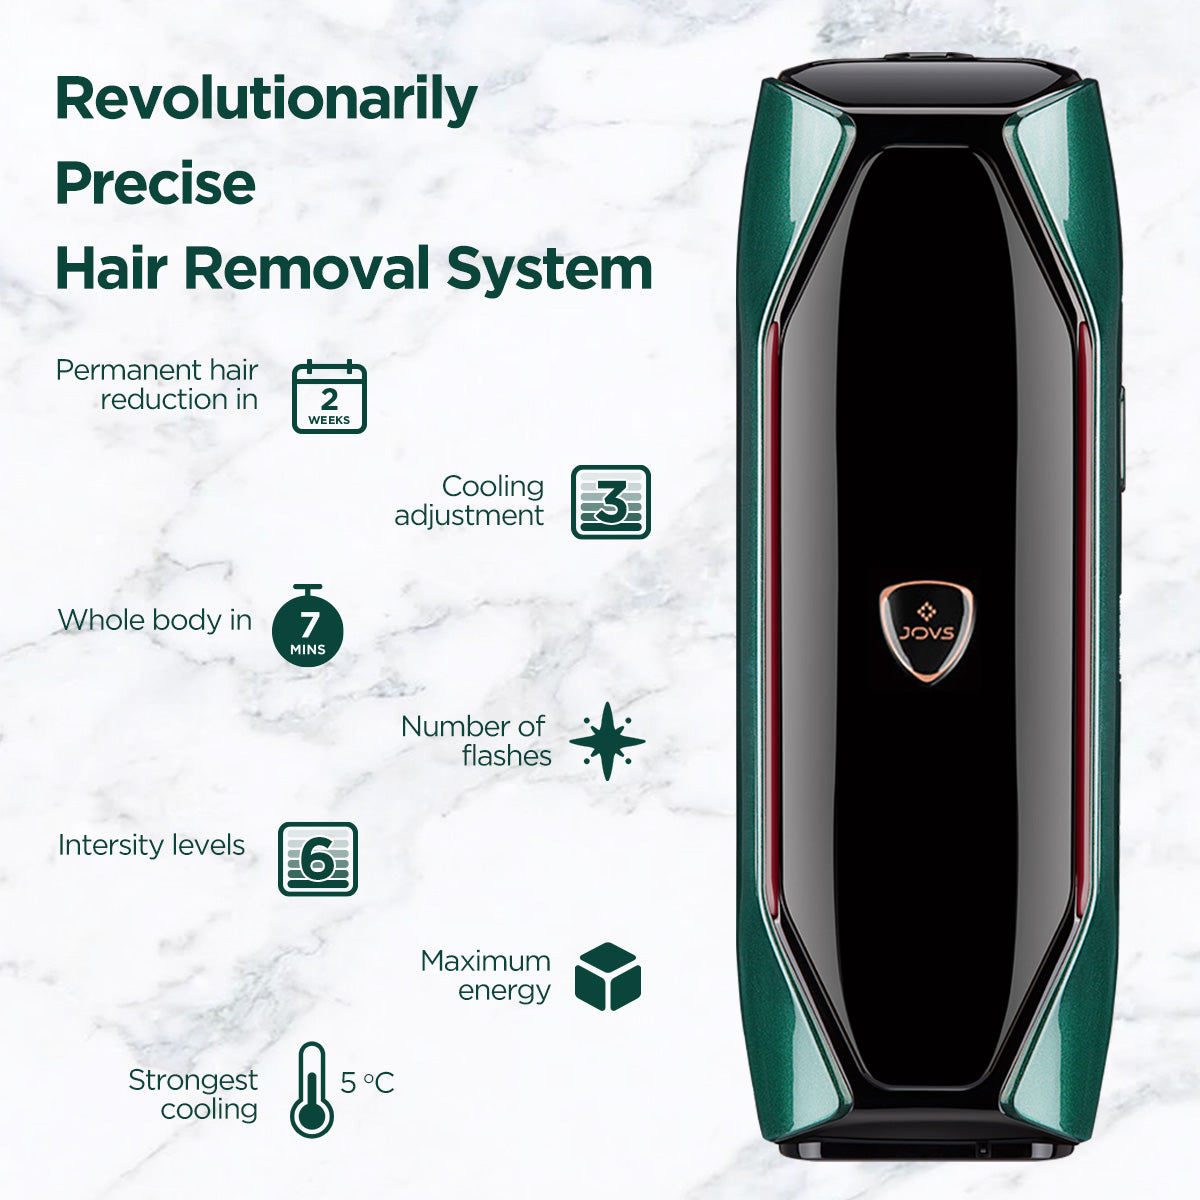 Innovative JOVS X™ IPL Hair Removal System, offering rapid whole-body treatment with advanced cooling and intensity features for a pain-free experience.